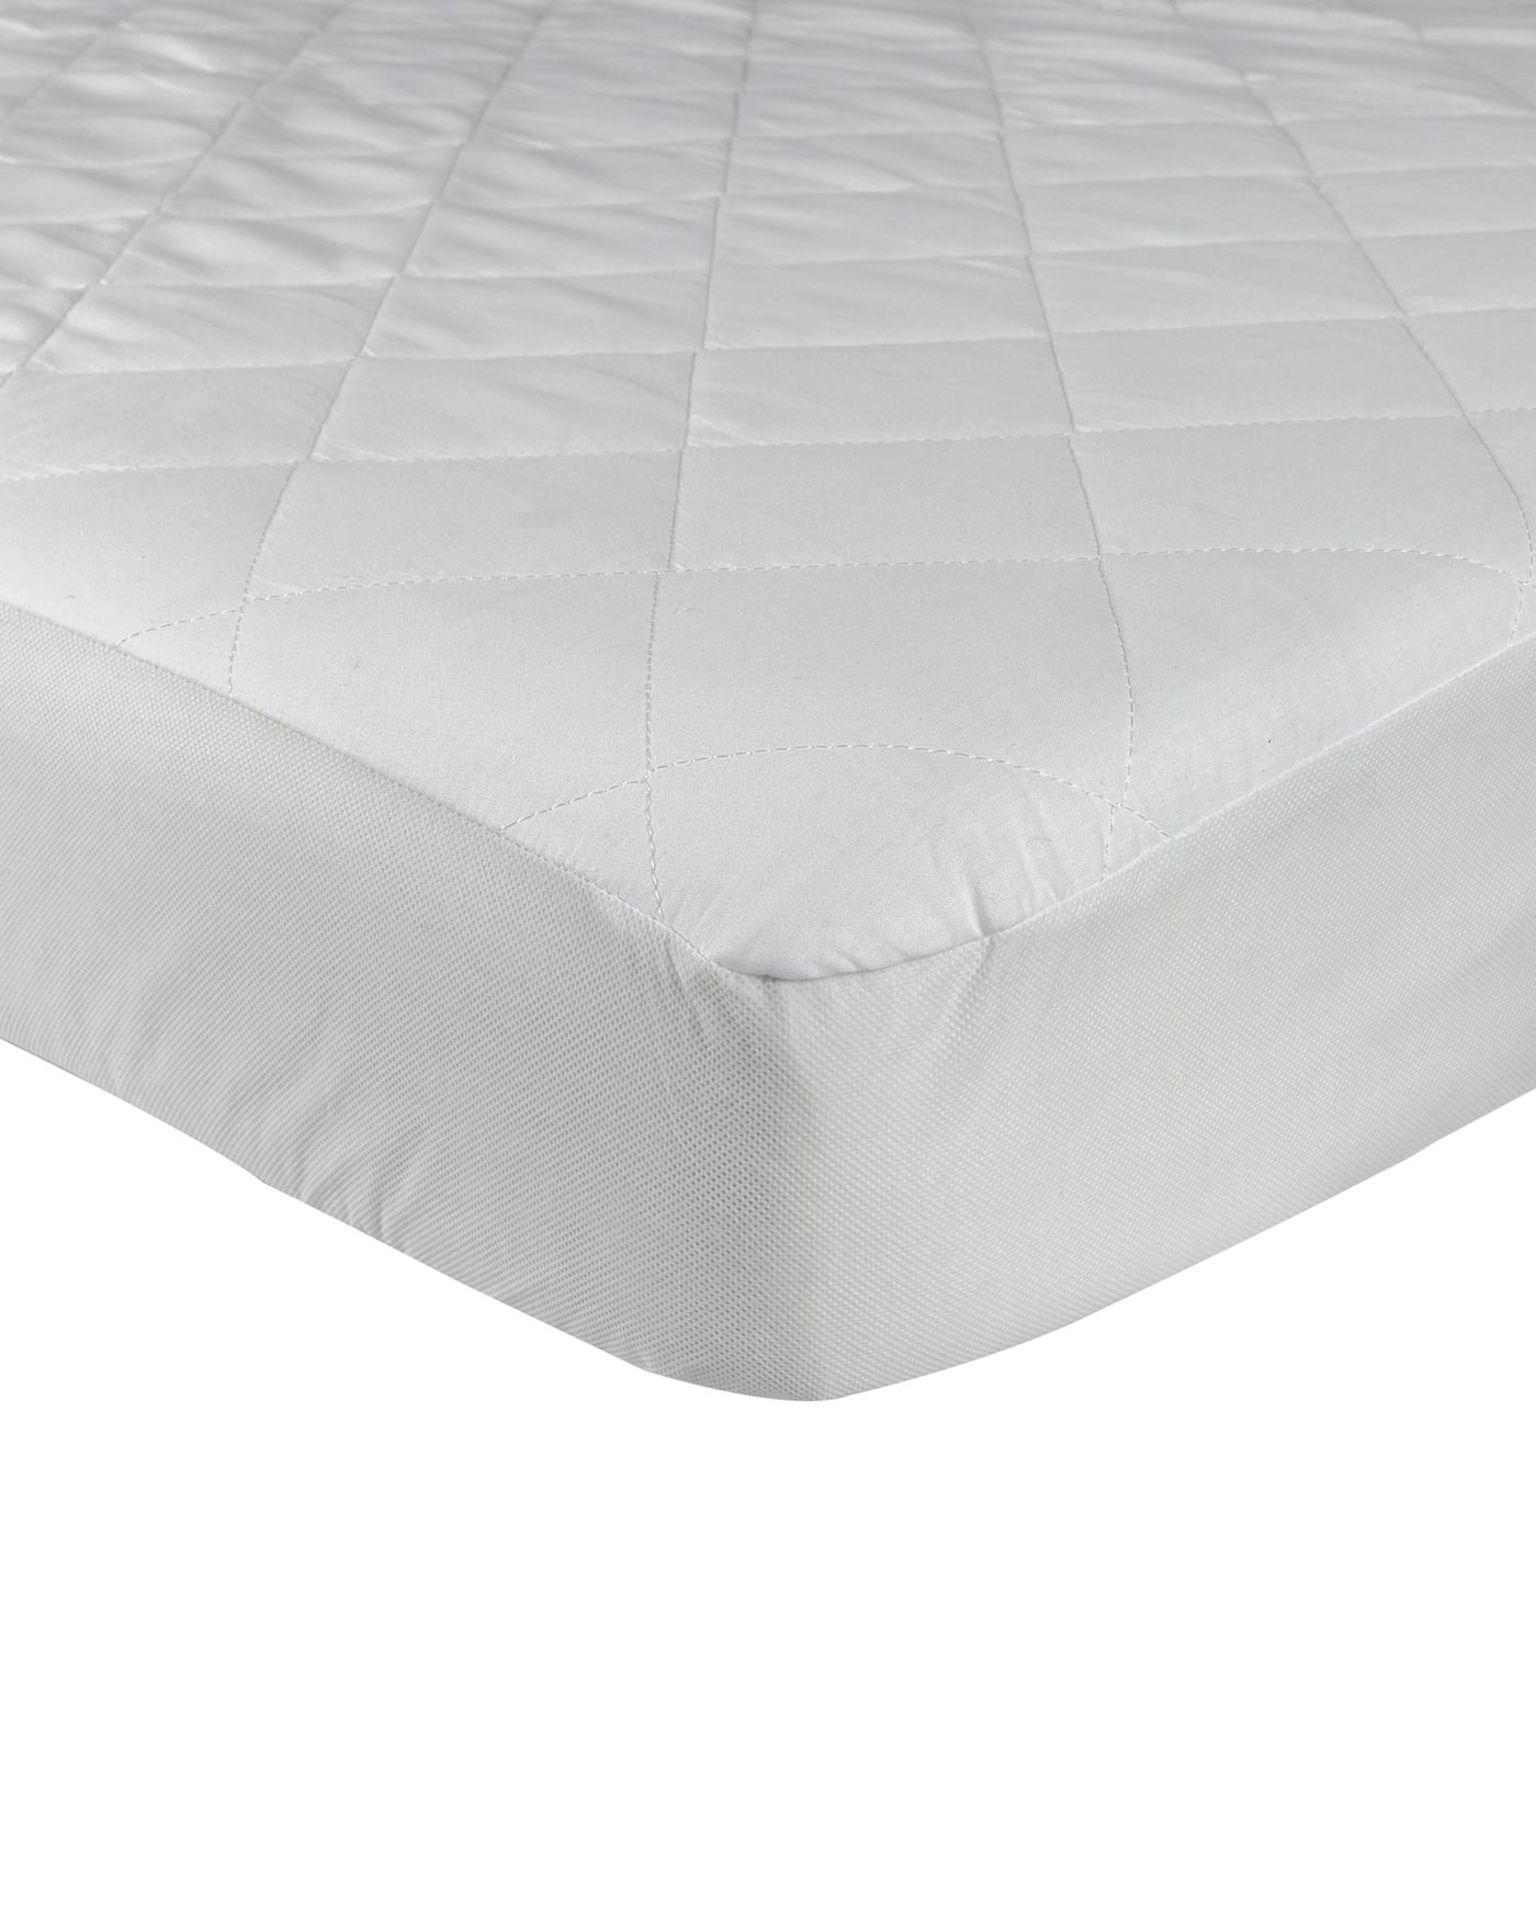 V Brand New 90x190+33cm Single Luxury Quilted Fitted Extra Deep Mattress Protector